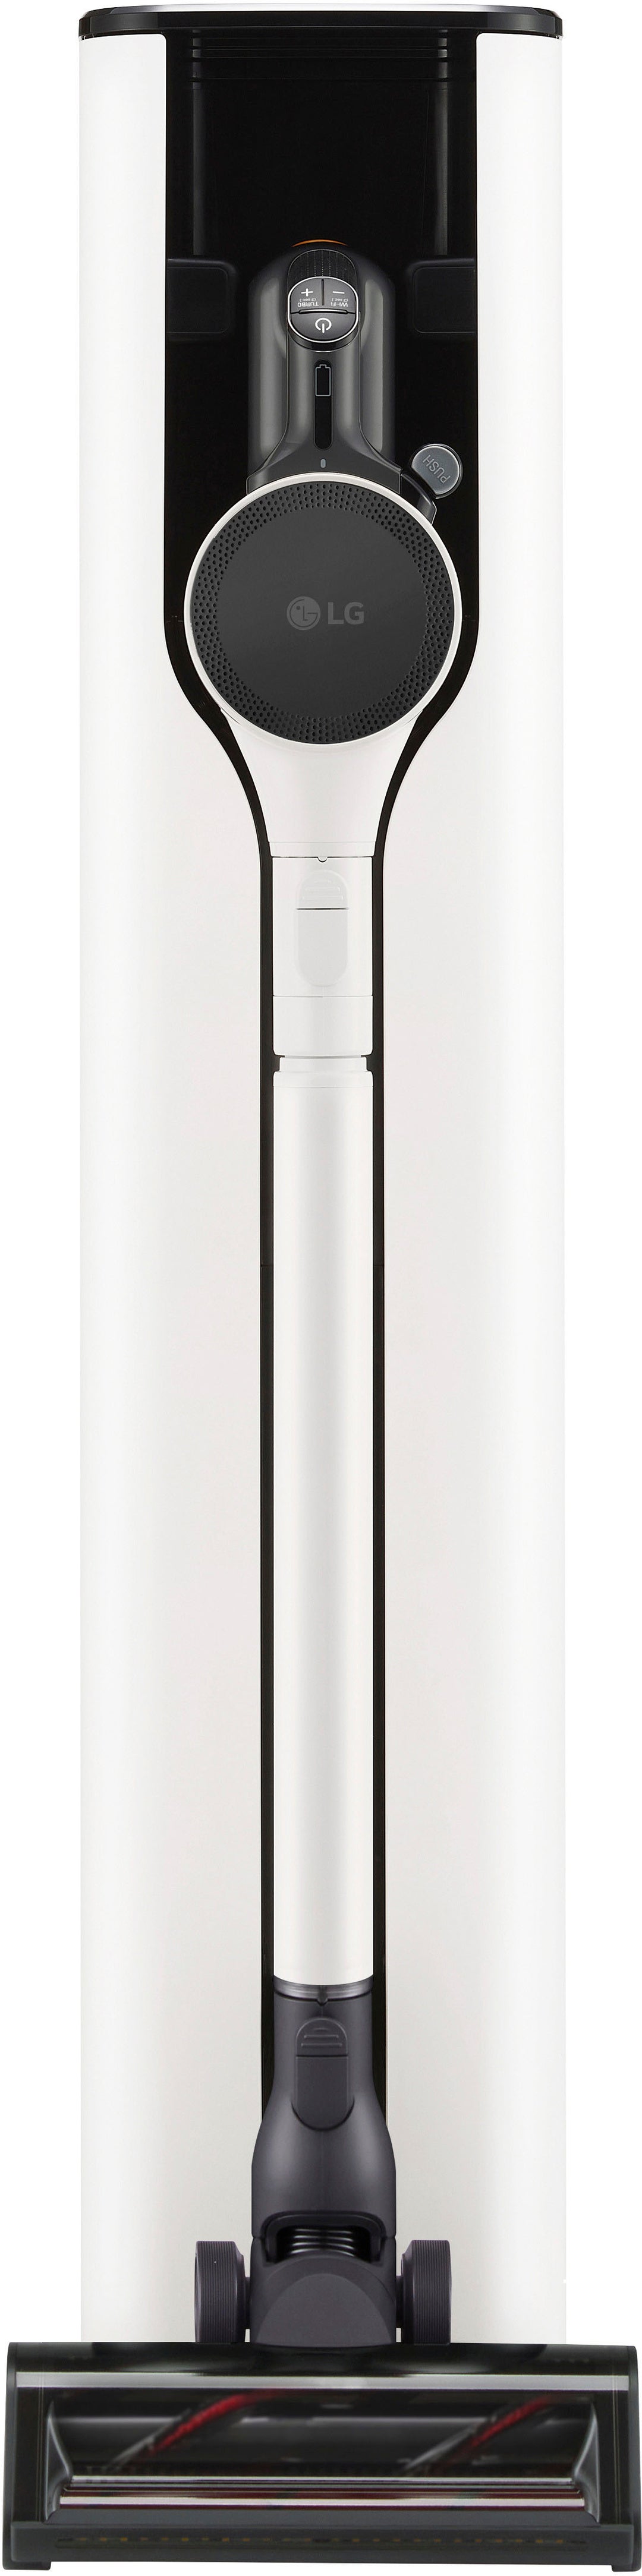 LG - CordZero Cordless Stick Vacuum with All-in-One Tower - Essence White_3